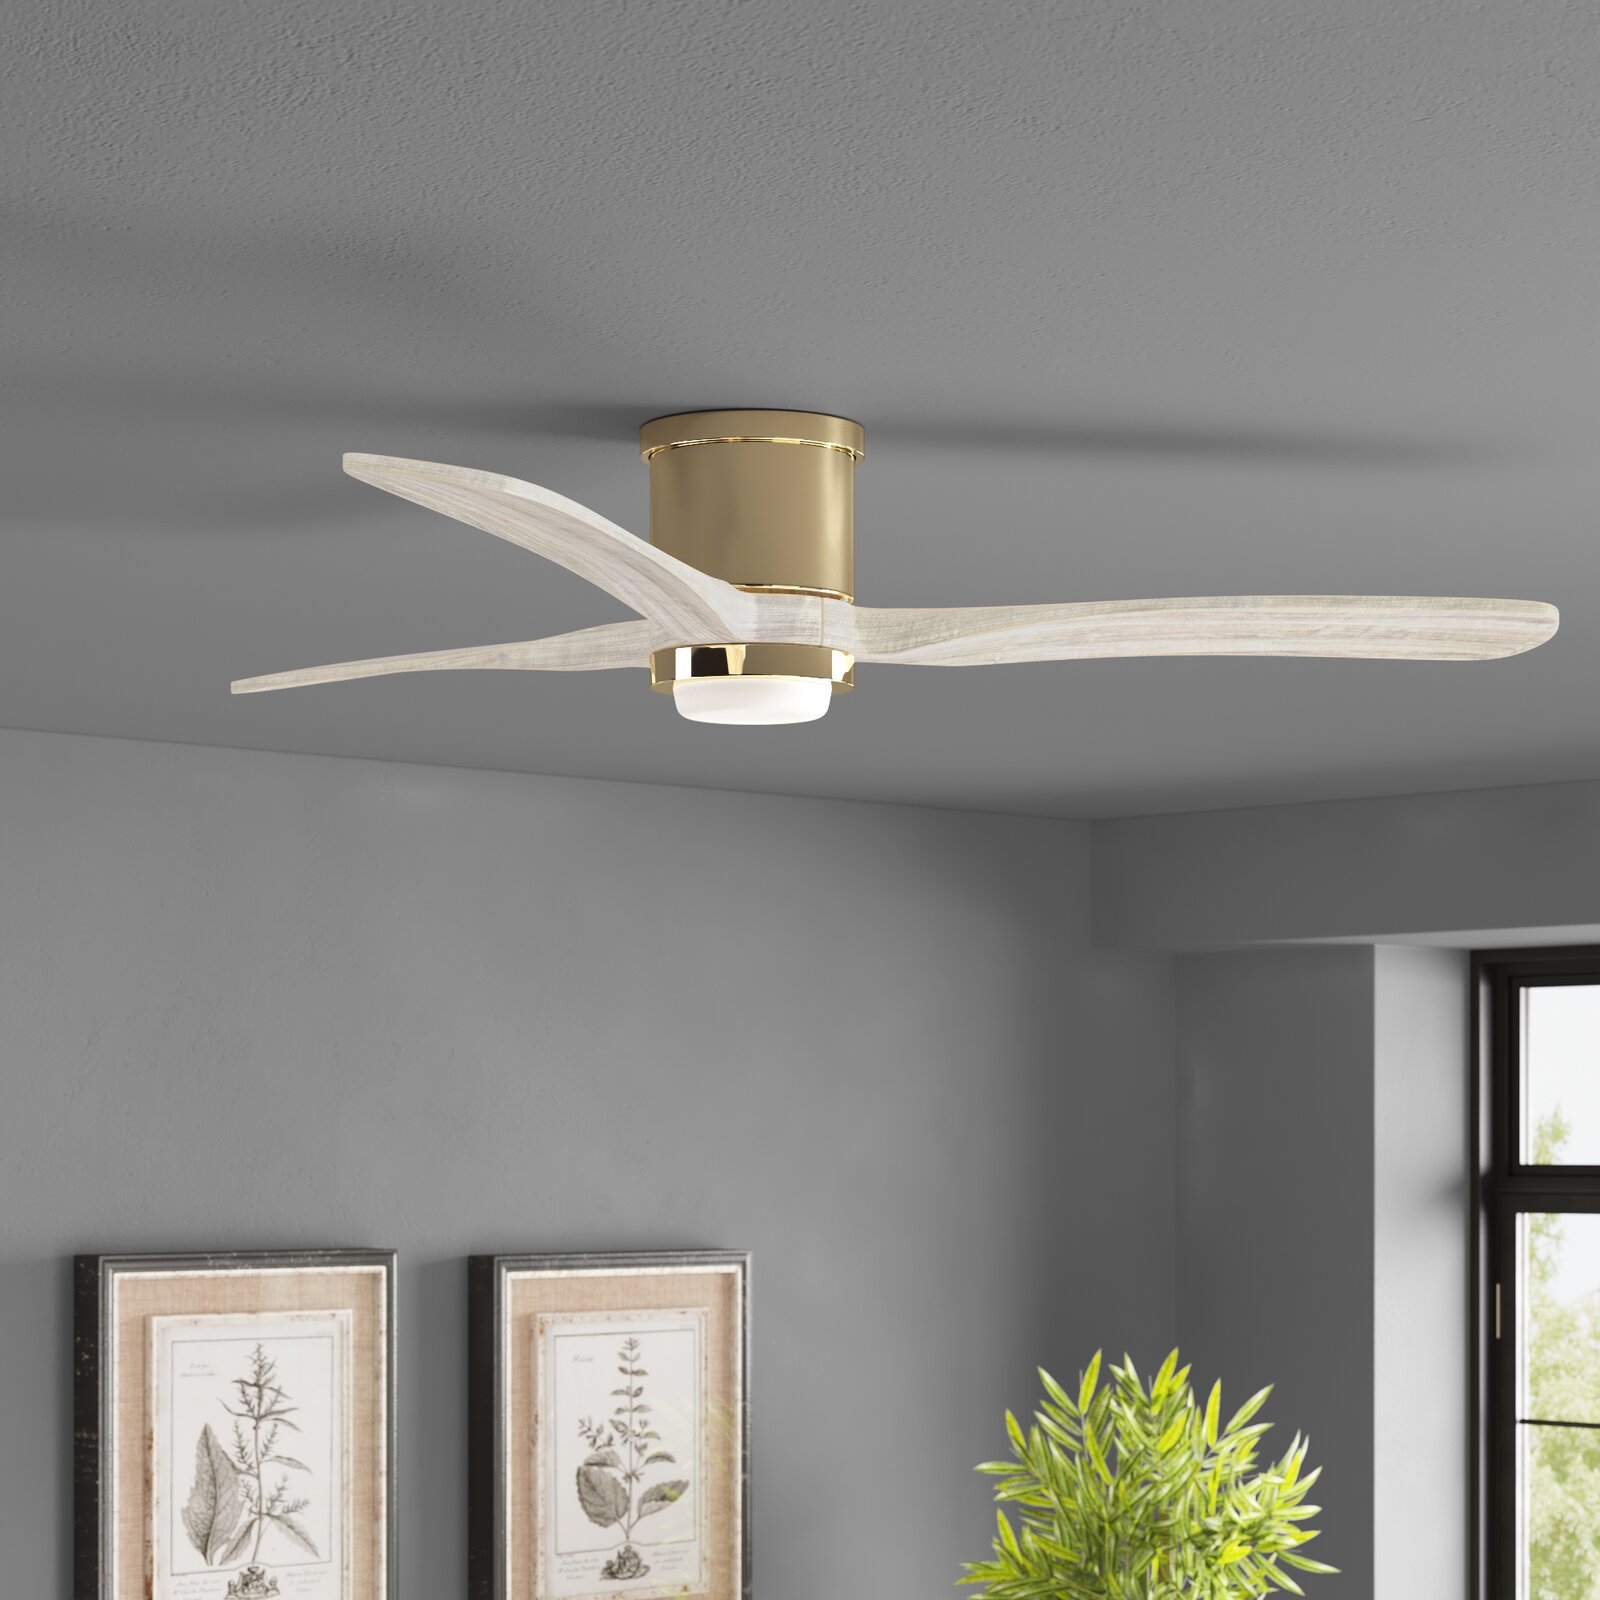 52'' Heatherton 3 - Blade LED Propeller Ceiling Fan with Remote Control and Light Kit Included - Image 0